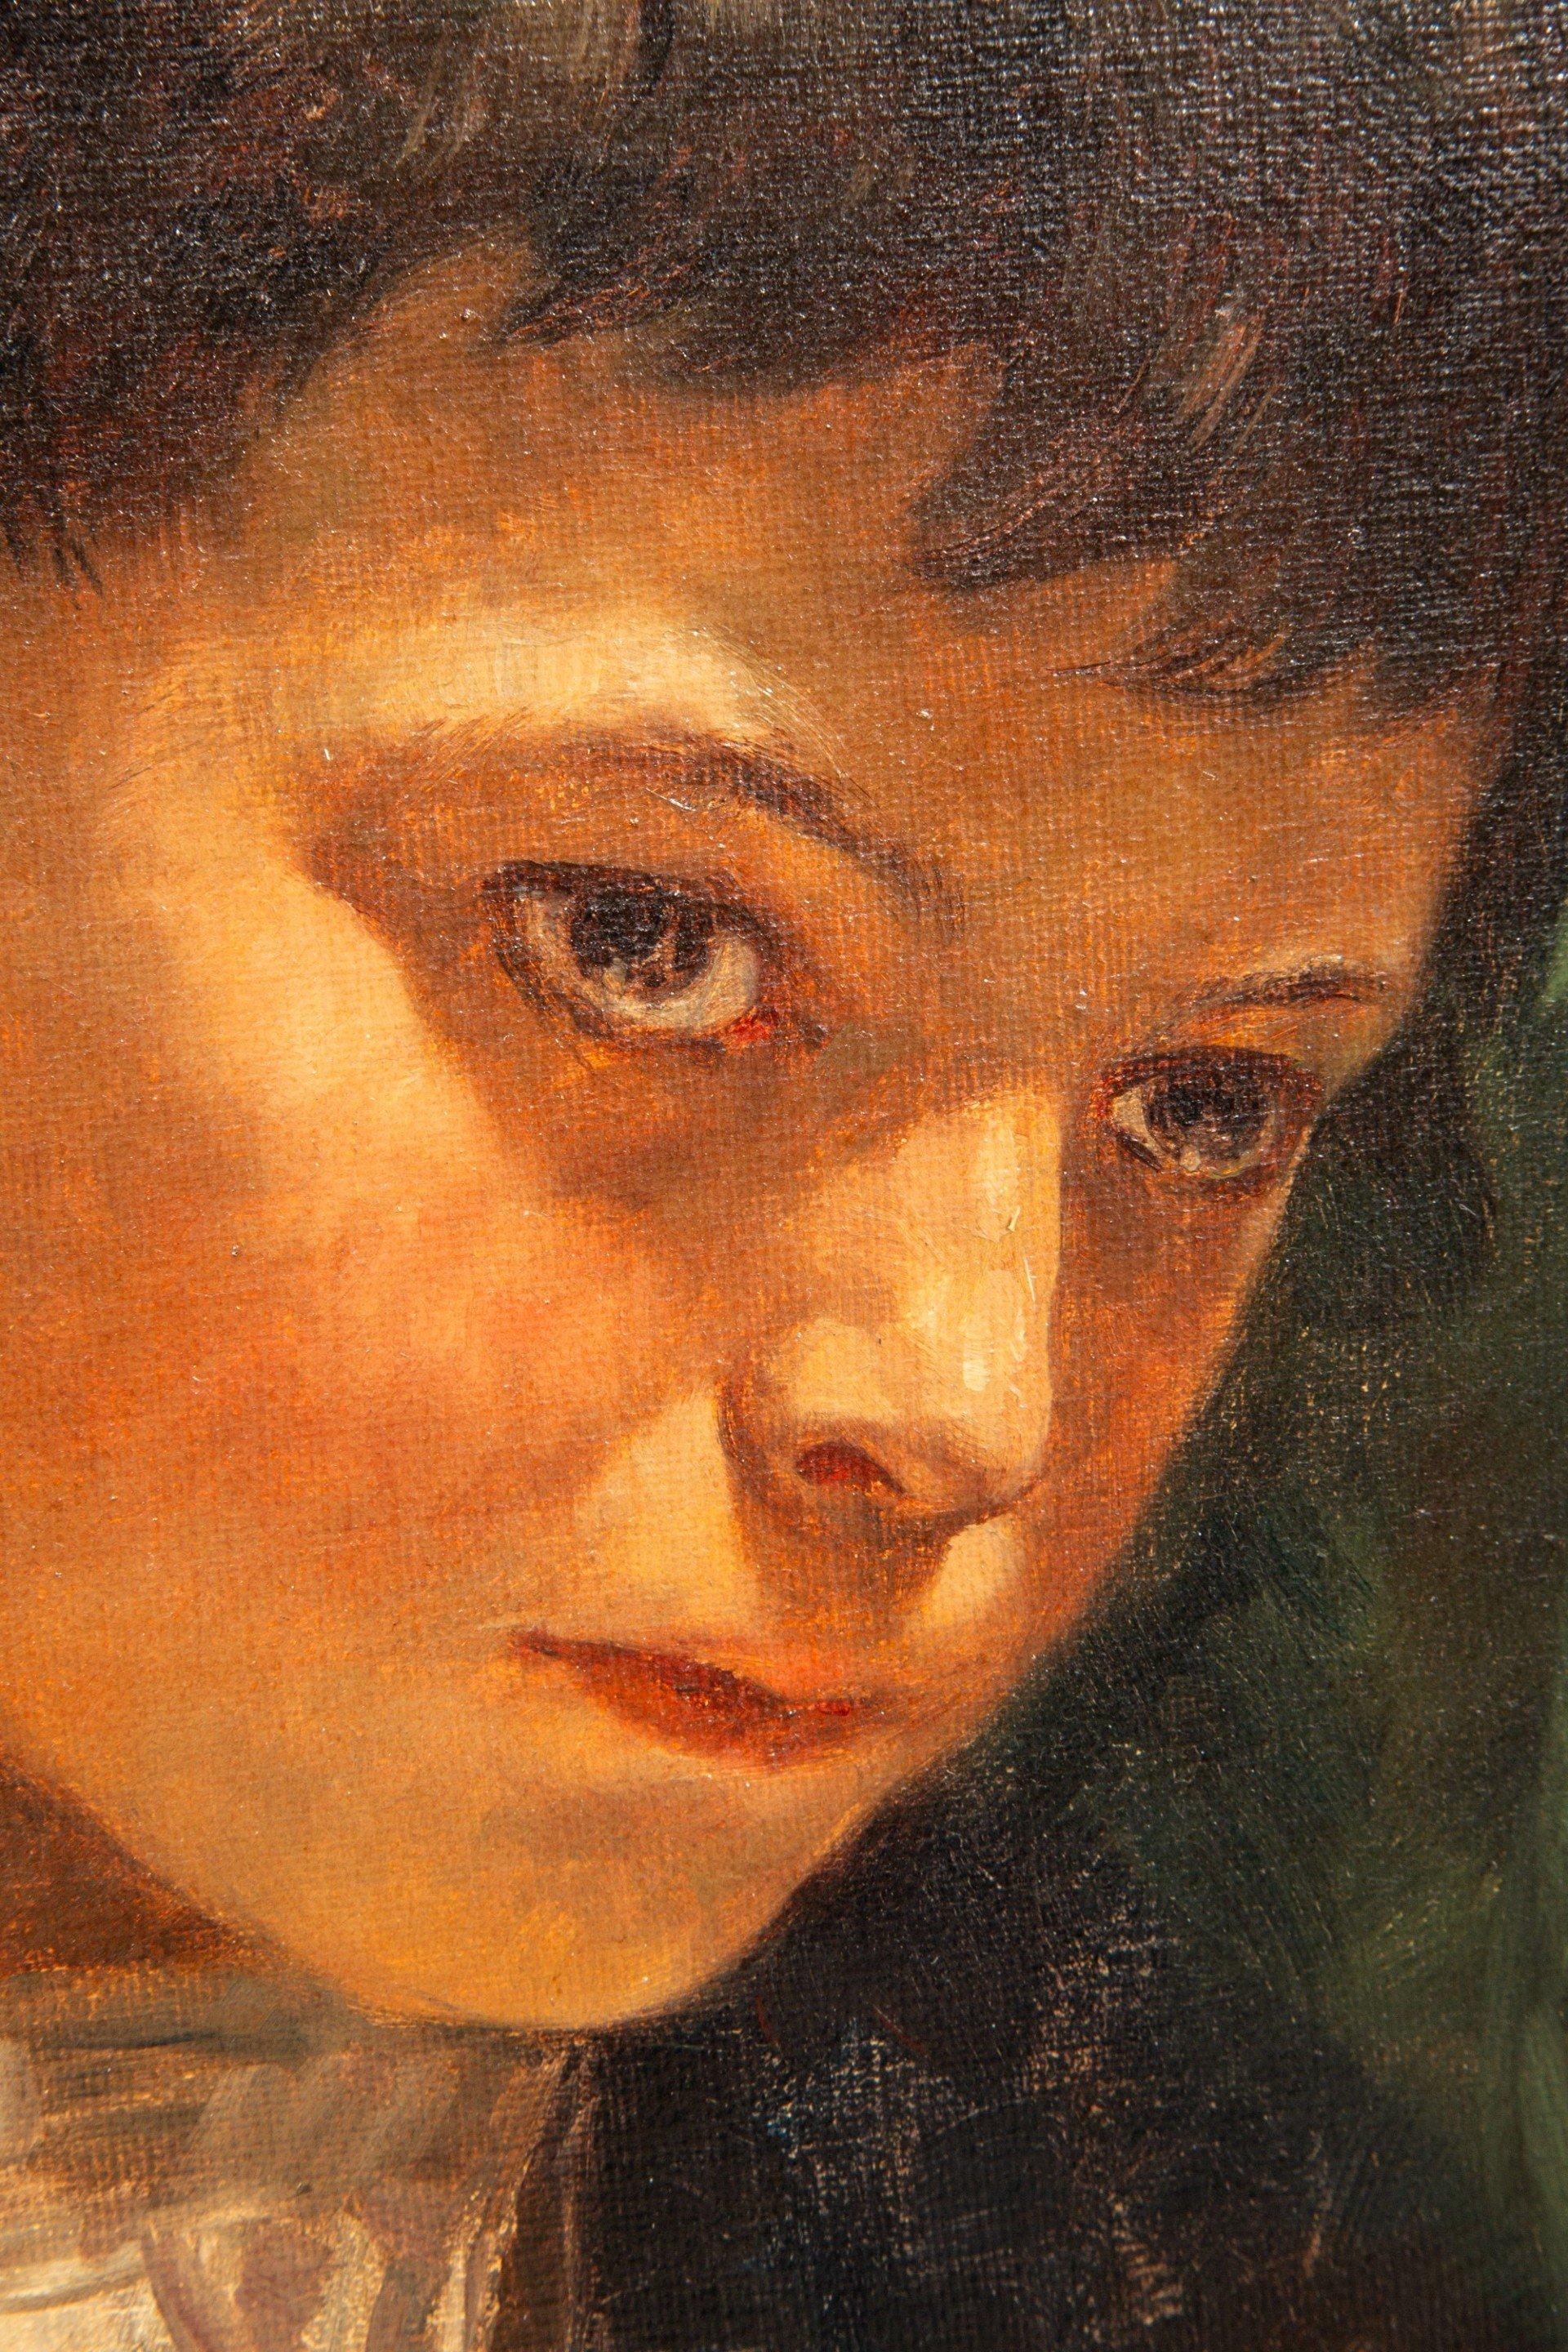 Study head of nostalgia, portrait of a melancholy-looking boy in a white shirt - Painting by  Meyer-Waldeck Kunz